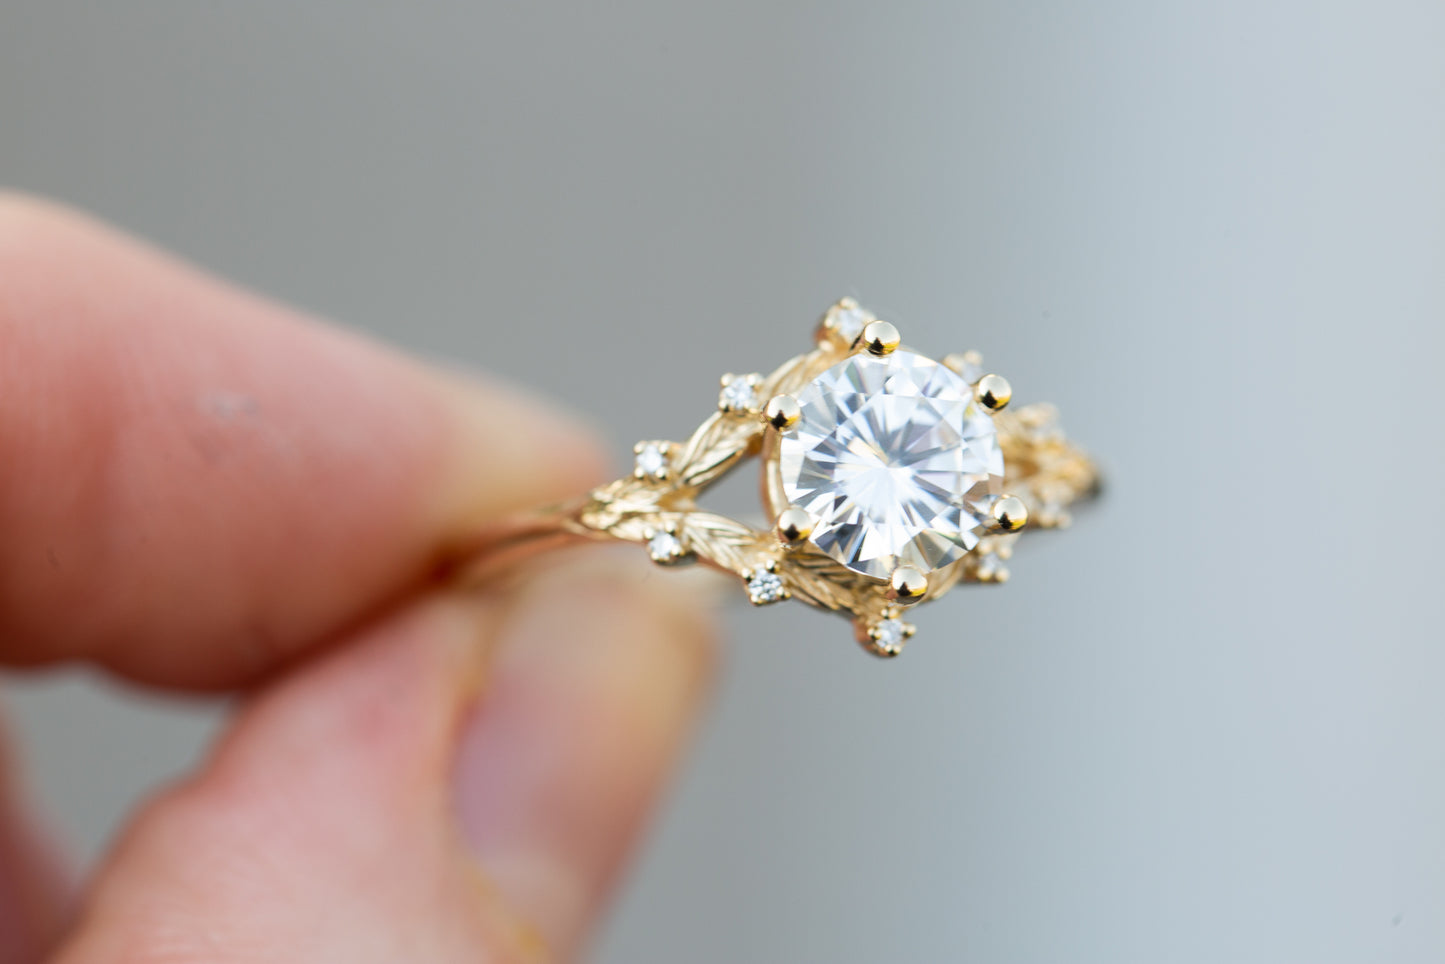 Woodland solitaire with 7mm round moissanite